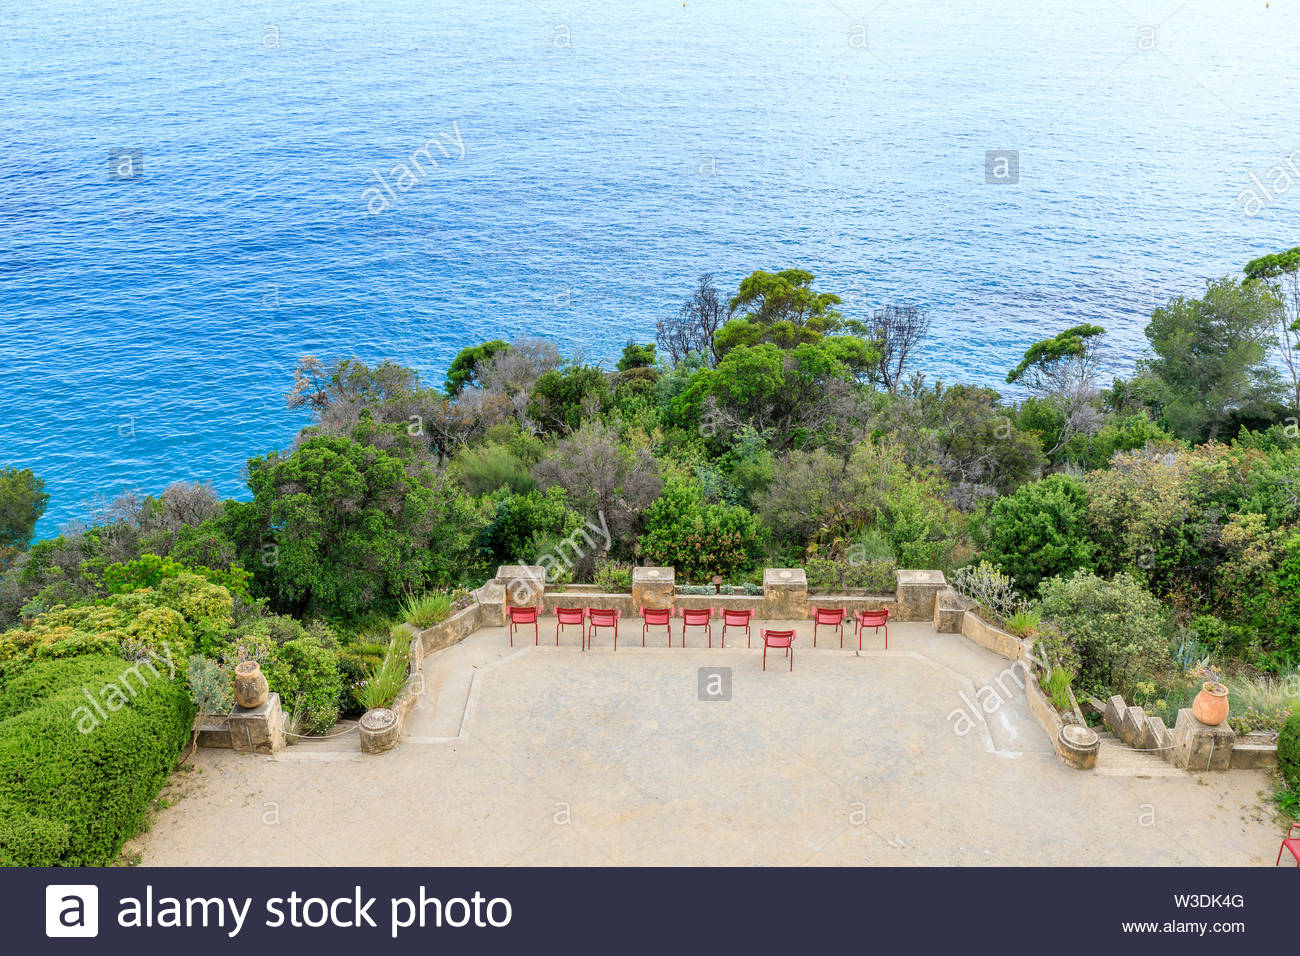 france var rayol canadel sur mer the domaine du rayol mediterranean garden property of the conservatoire du littoral terrace with chairs oblig W3DK4G